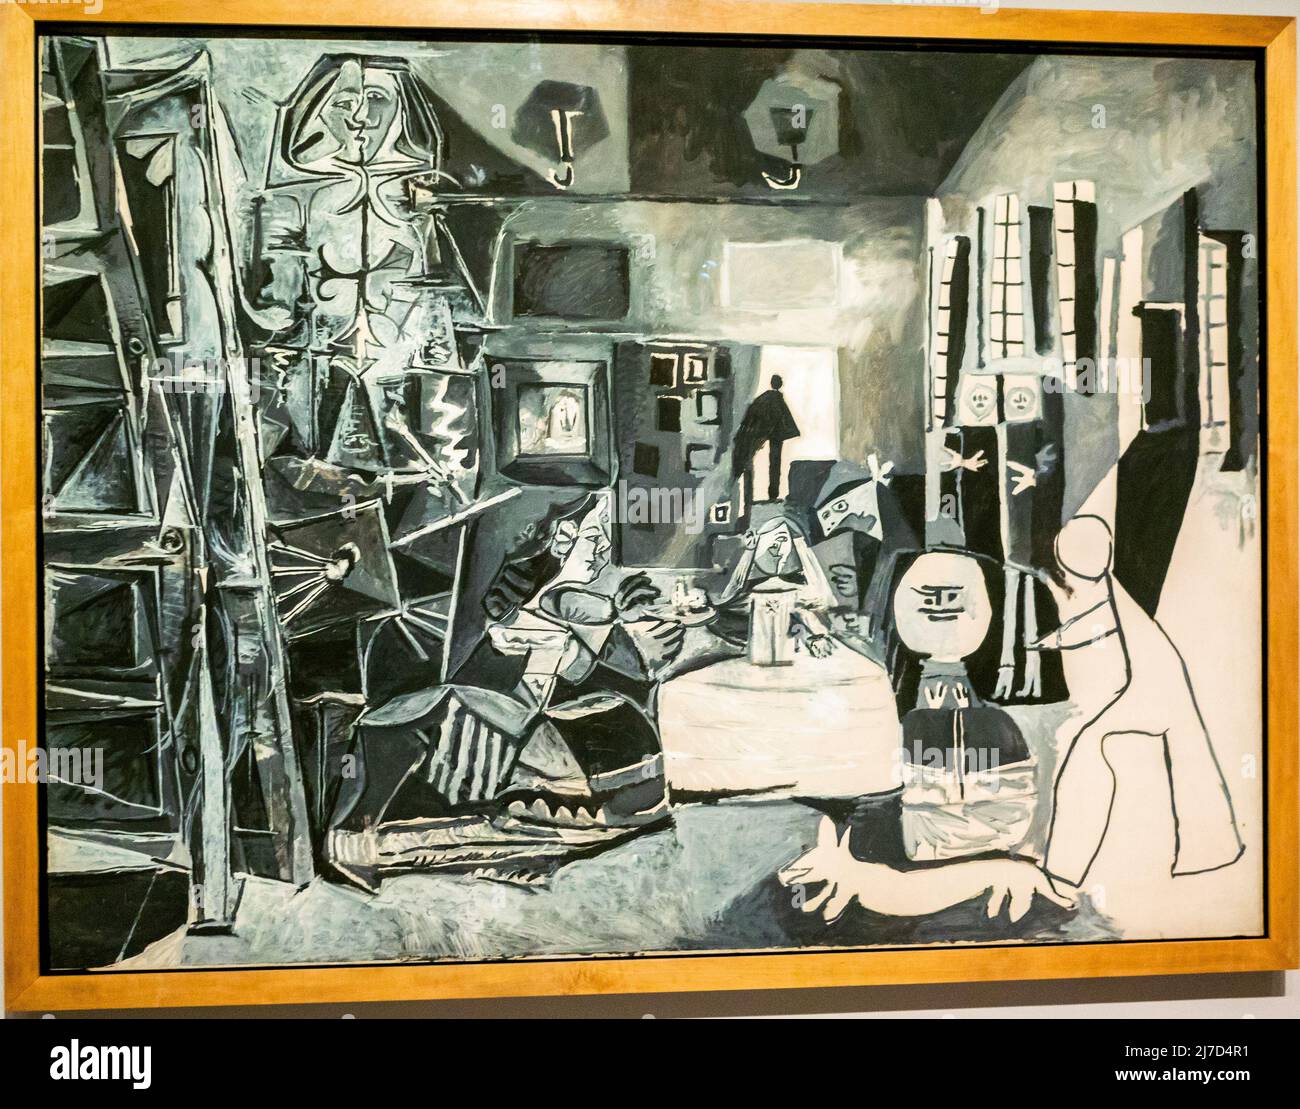 Barcelona, Spain, Pablo Picasso Museum, Abstract Painting, "Las Meninas,  Cannes, 1957 Stock Photo - Alamy